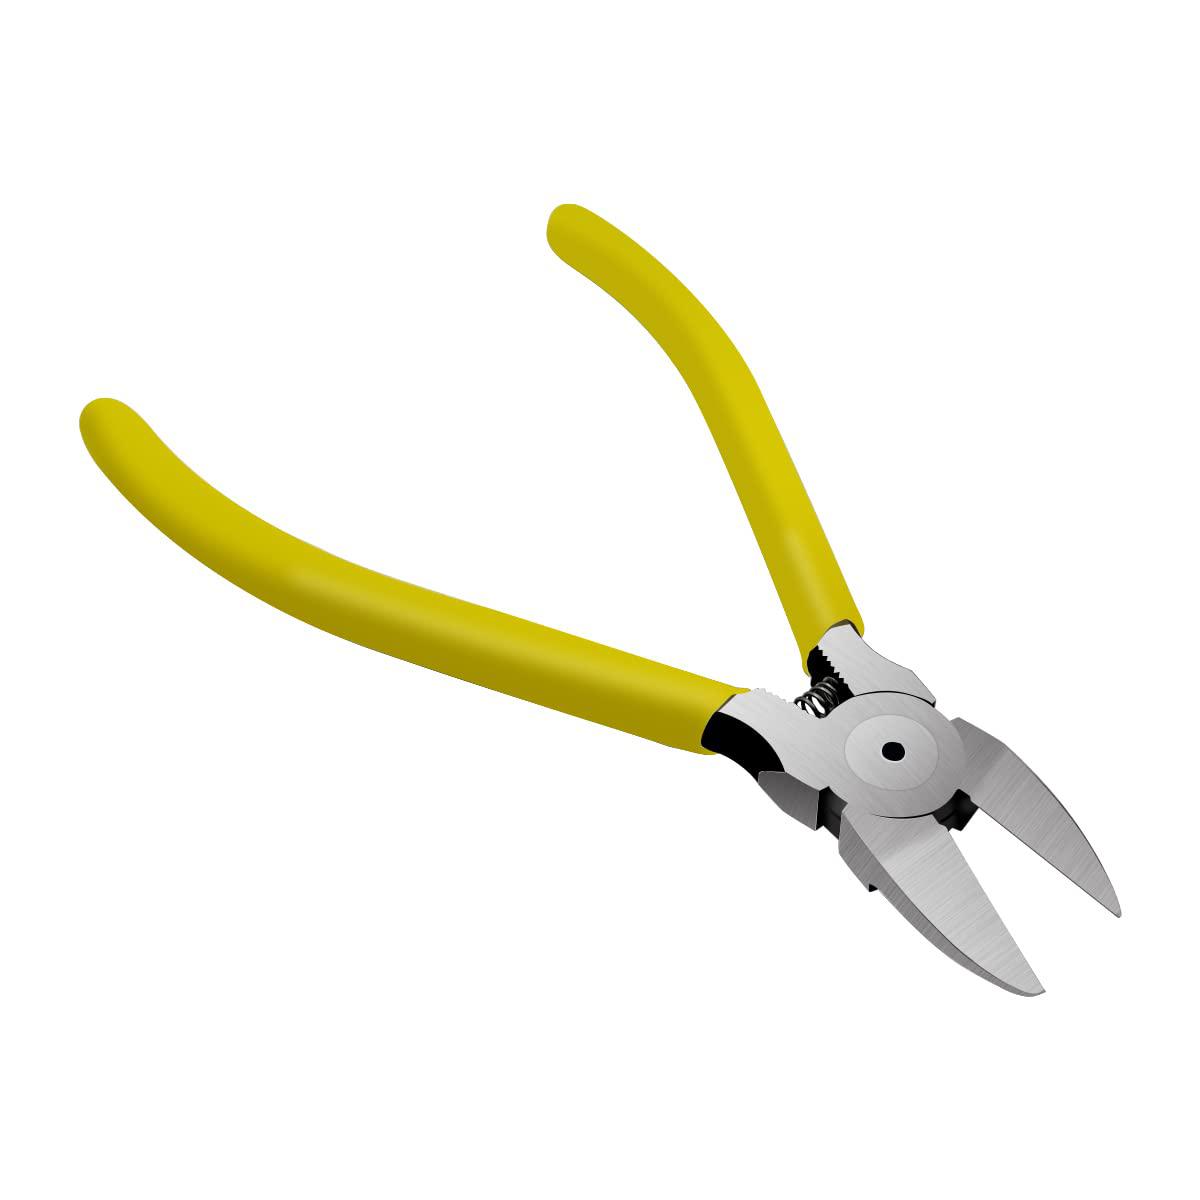 zhuohai 6 inch wire cutters diagonal cutting pliers?precision flush cutters  for crafts, diy,jewelry making